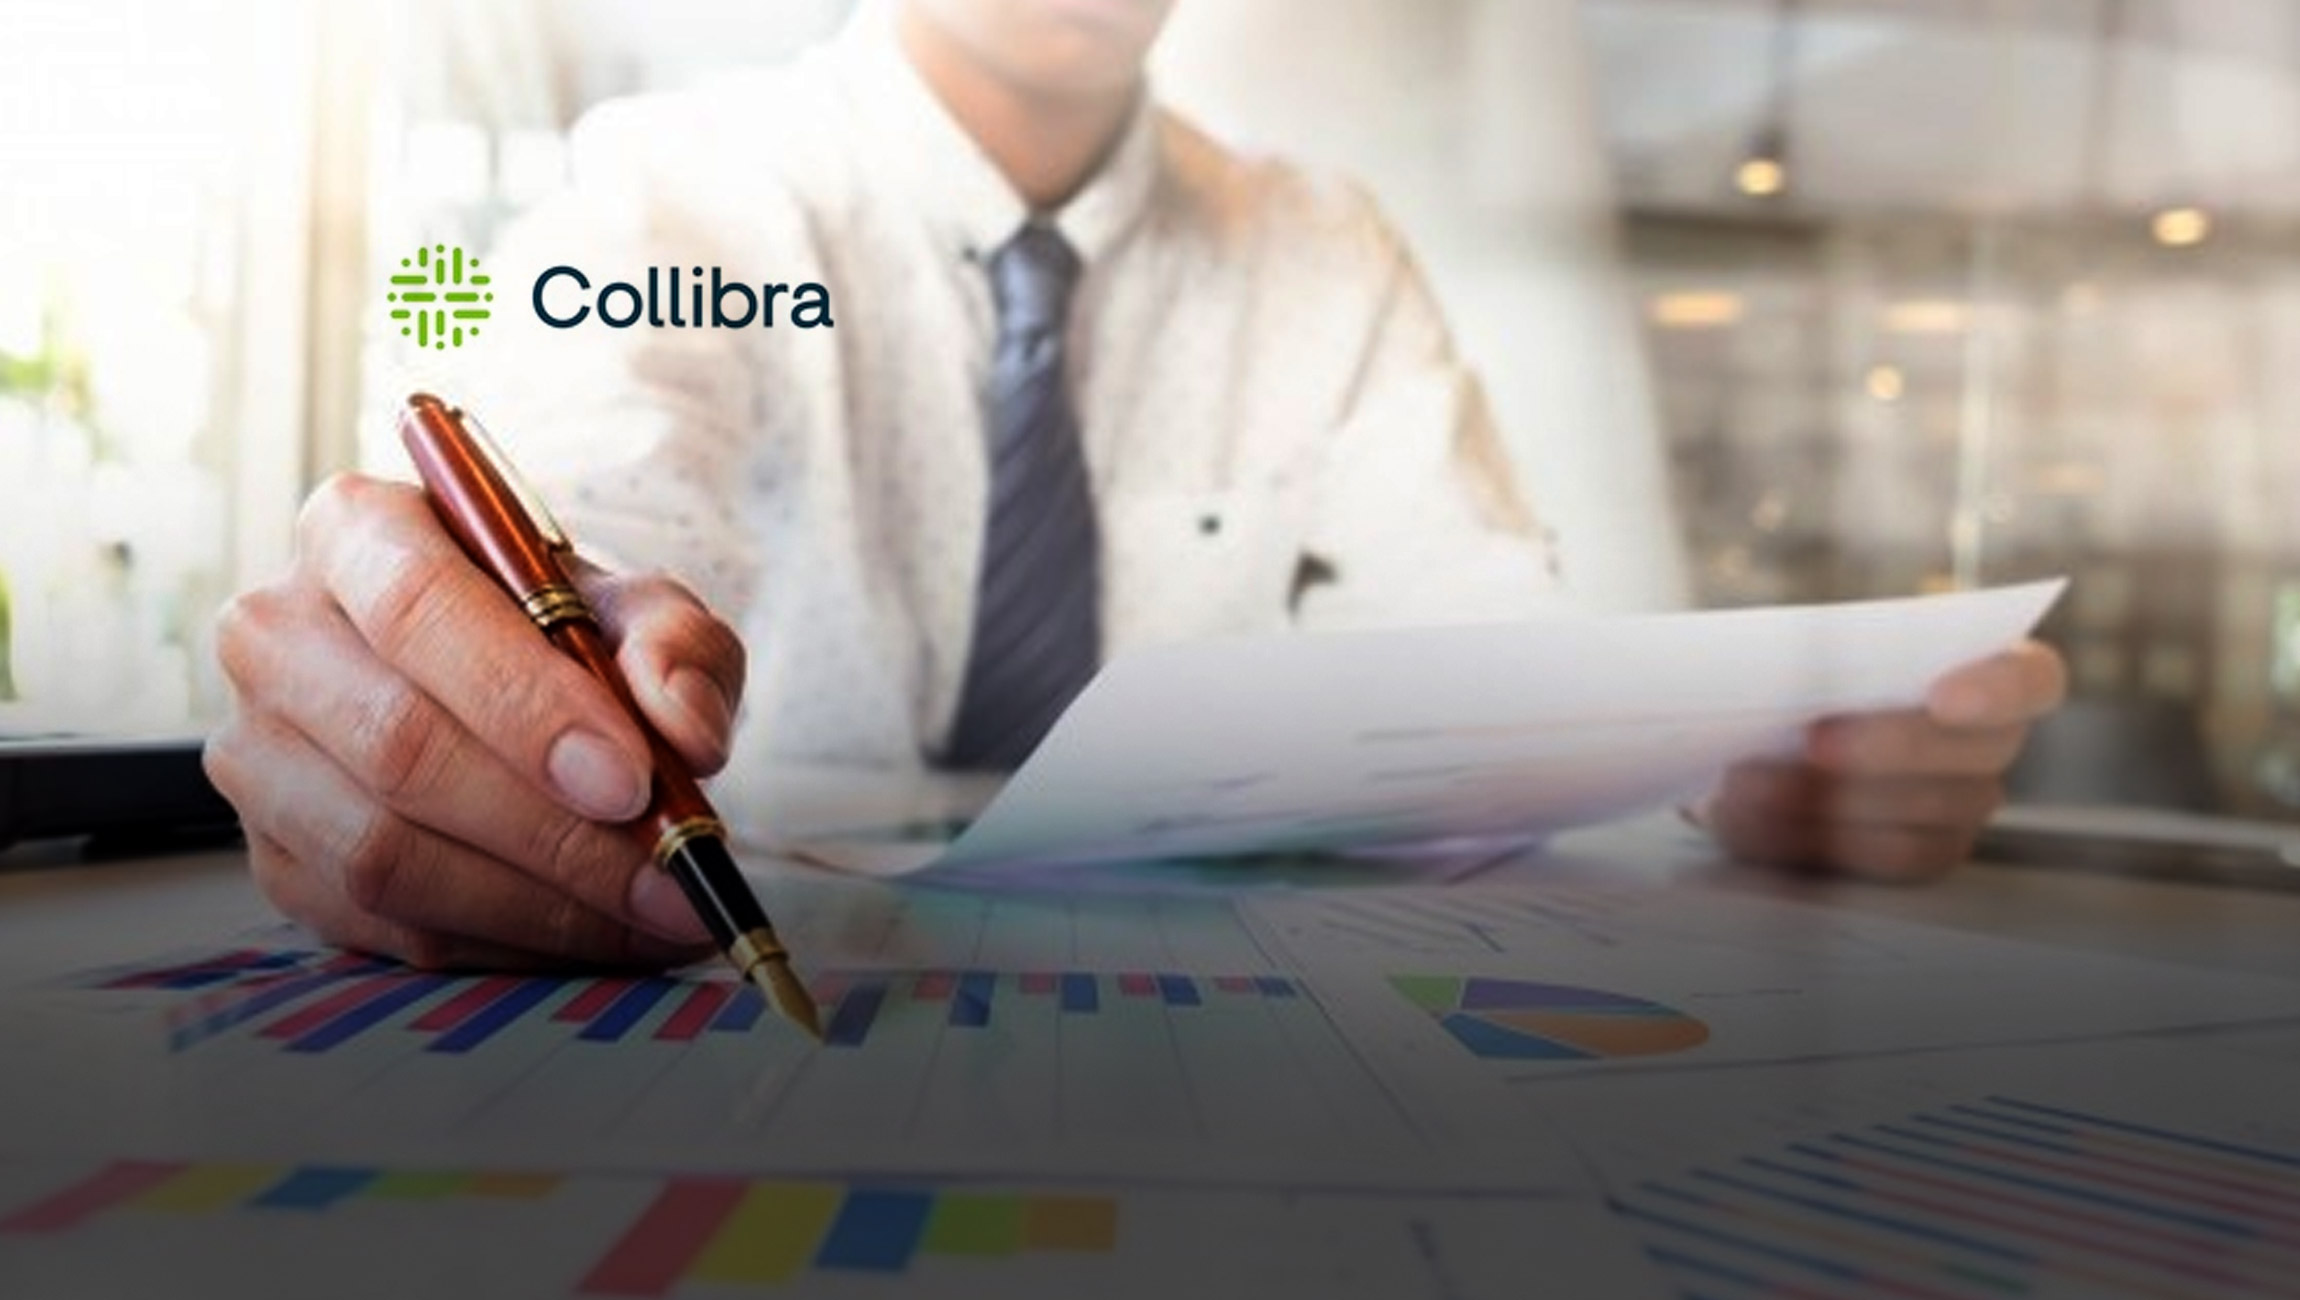 Collibra Launches as a Managed Service on the Google Cloud Platform